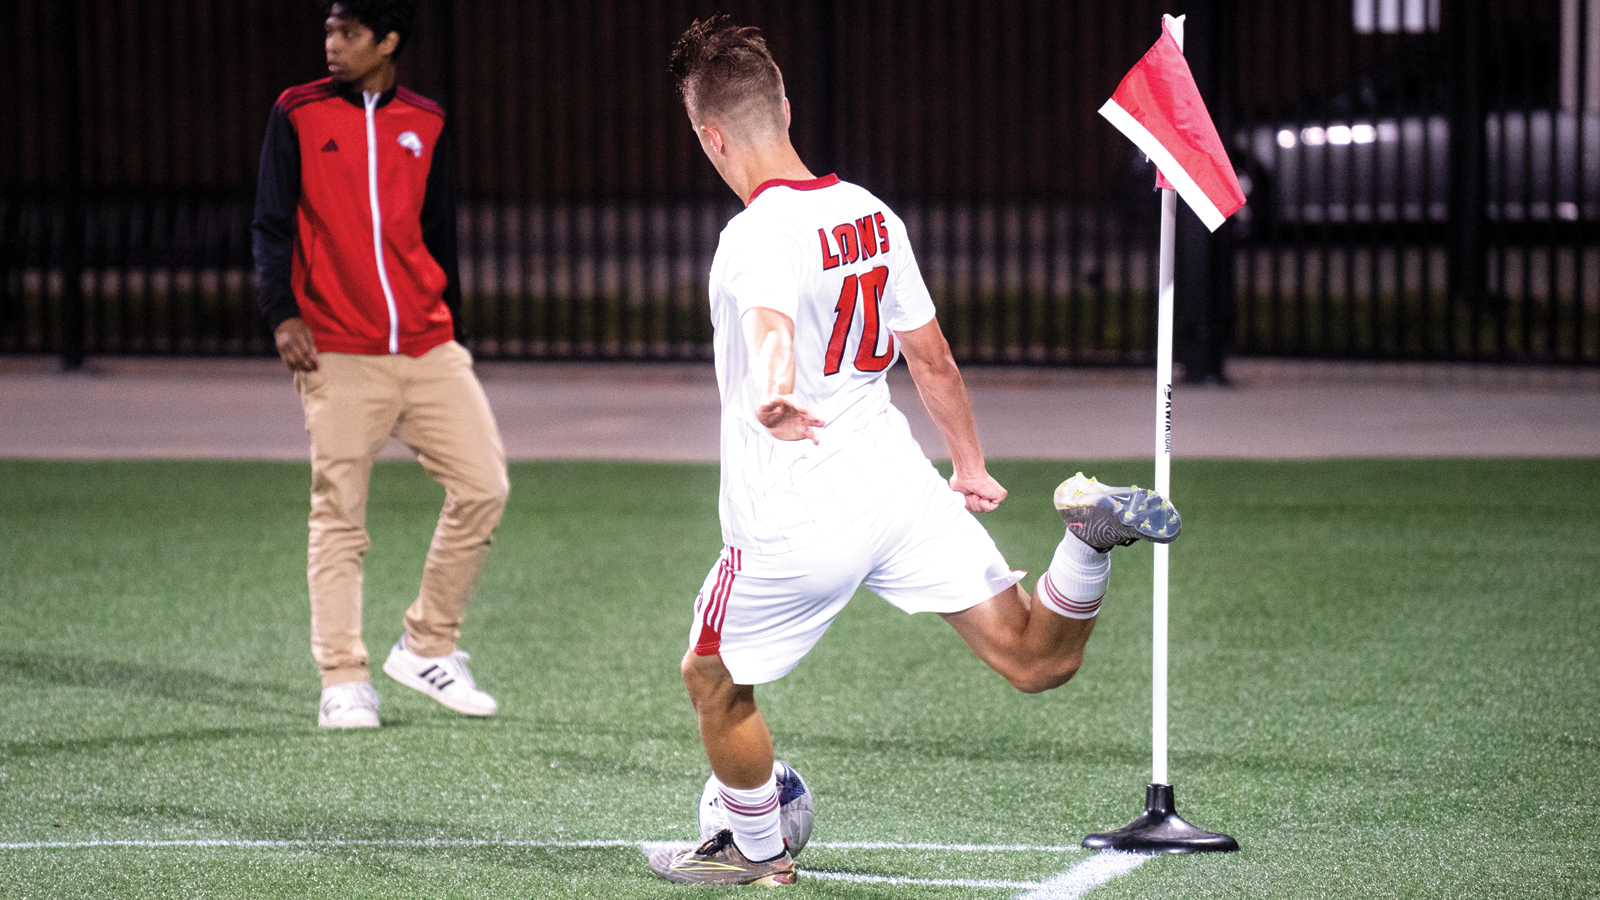 York men's soccer player Christian Zeppieri in the midst of taking a corner kick during a game